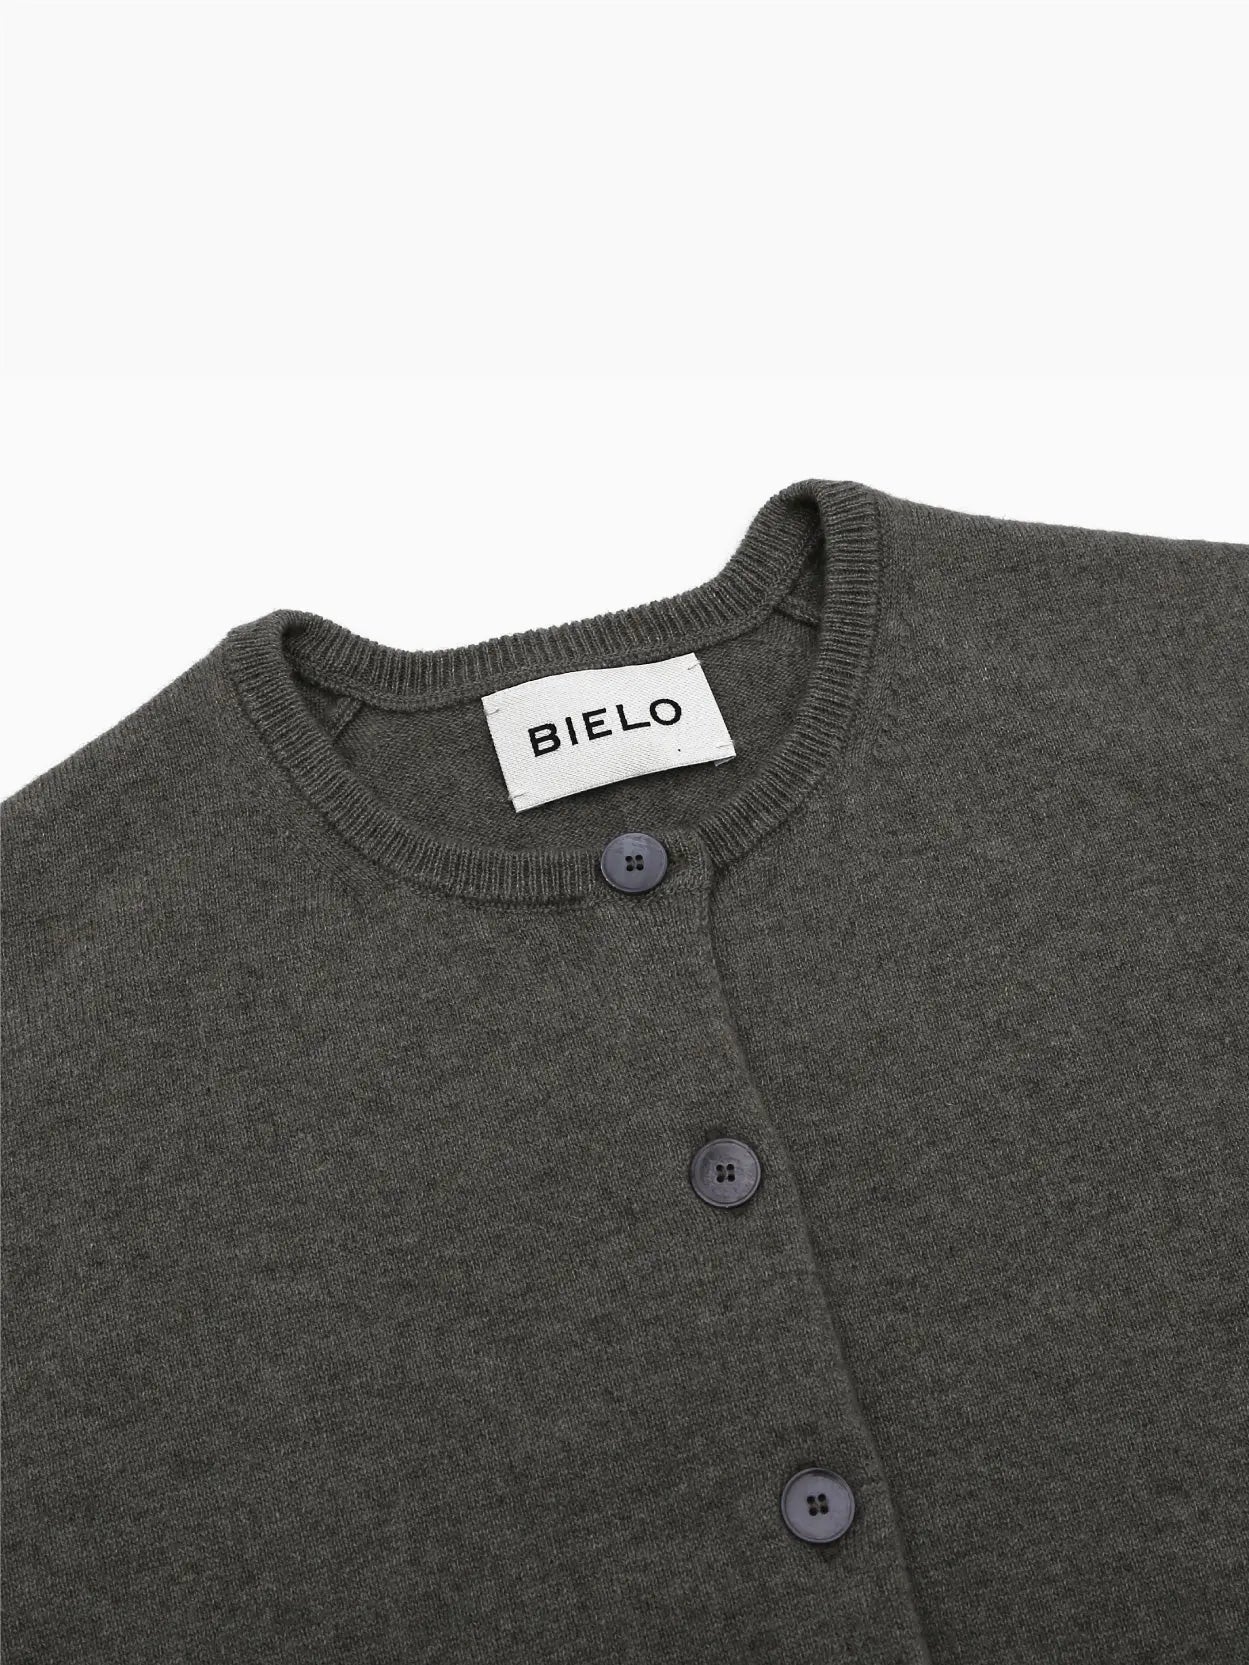 A Uba Vest Khaki by Bielo is displayed against a white background. Available at Bassalstore in Barcelona, the vest features a button-up front with multiple black buttons and a round neckline.